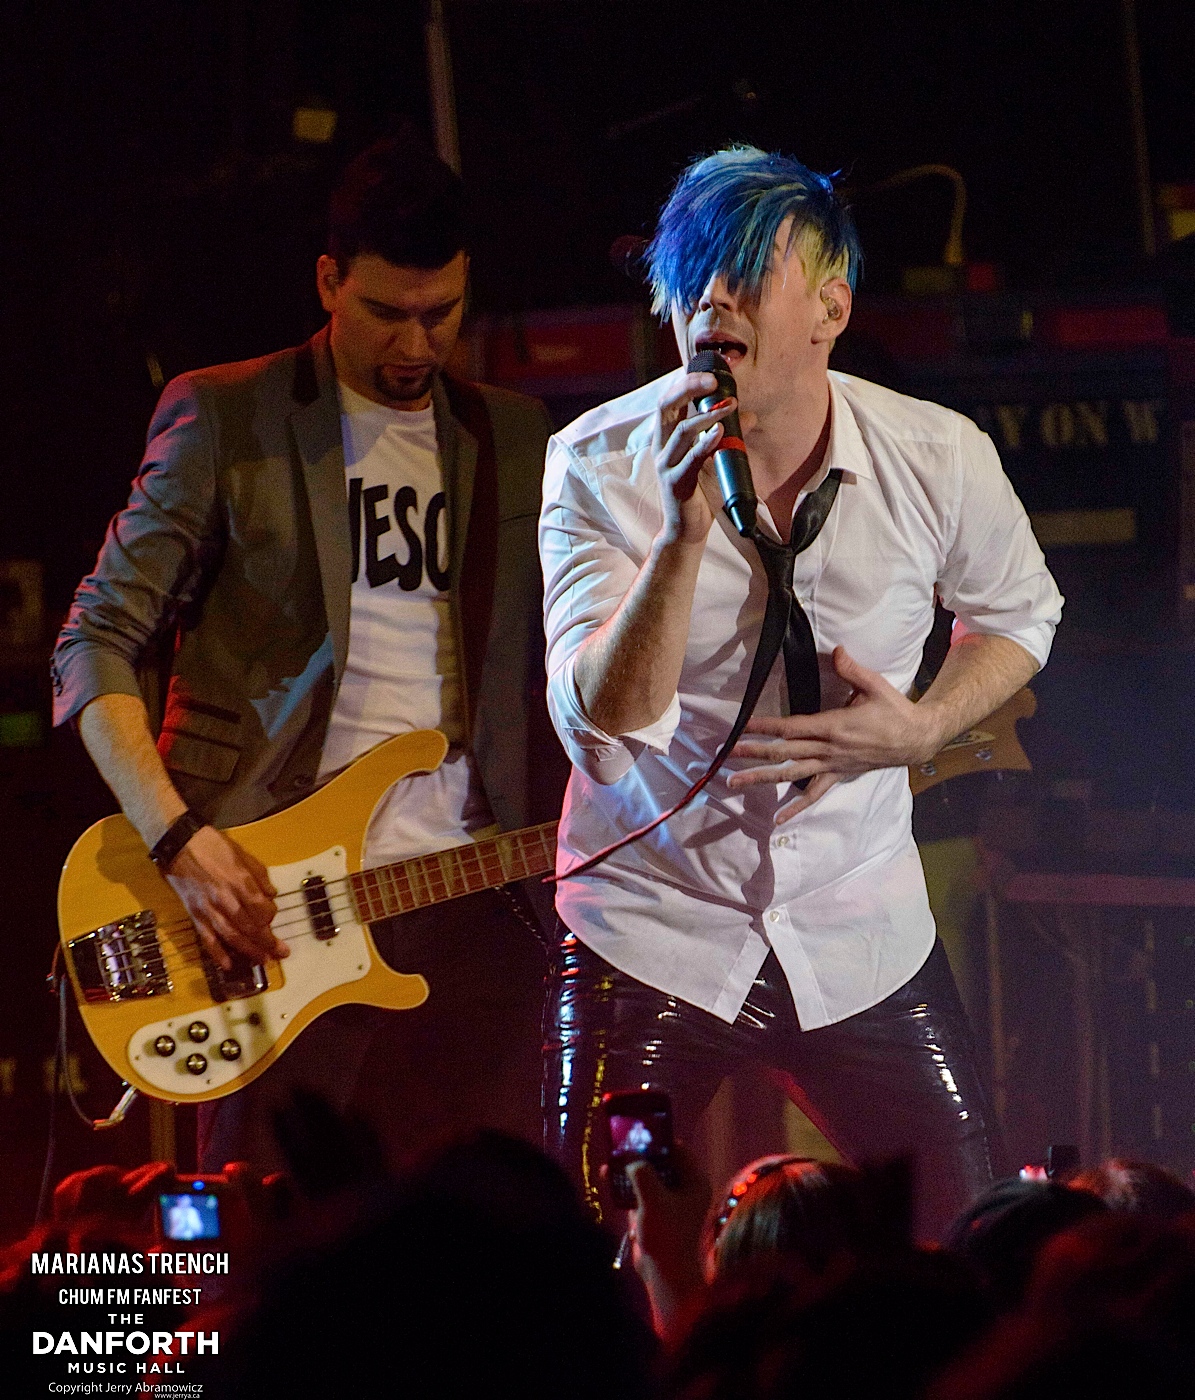 20130322 Marianas Trench at The Danforth Music Hall Toronto 0241 copy